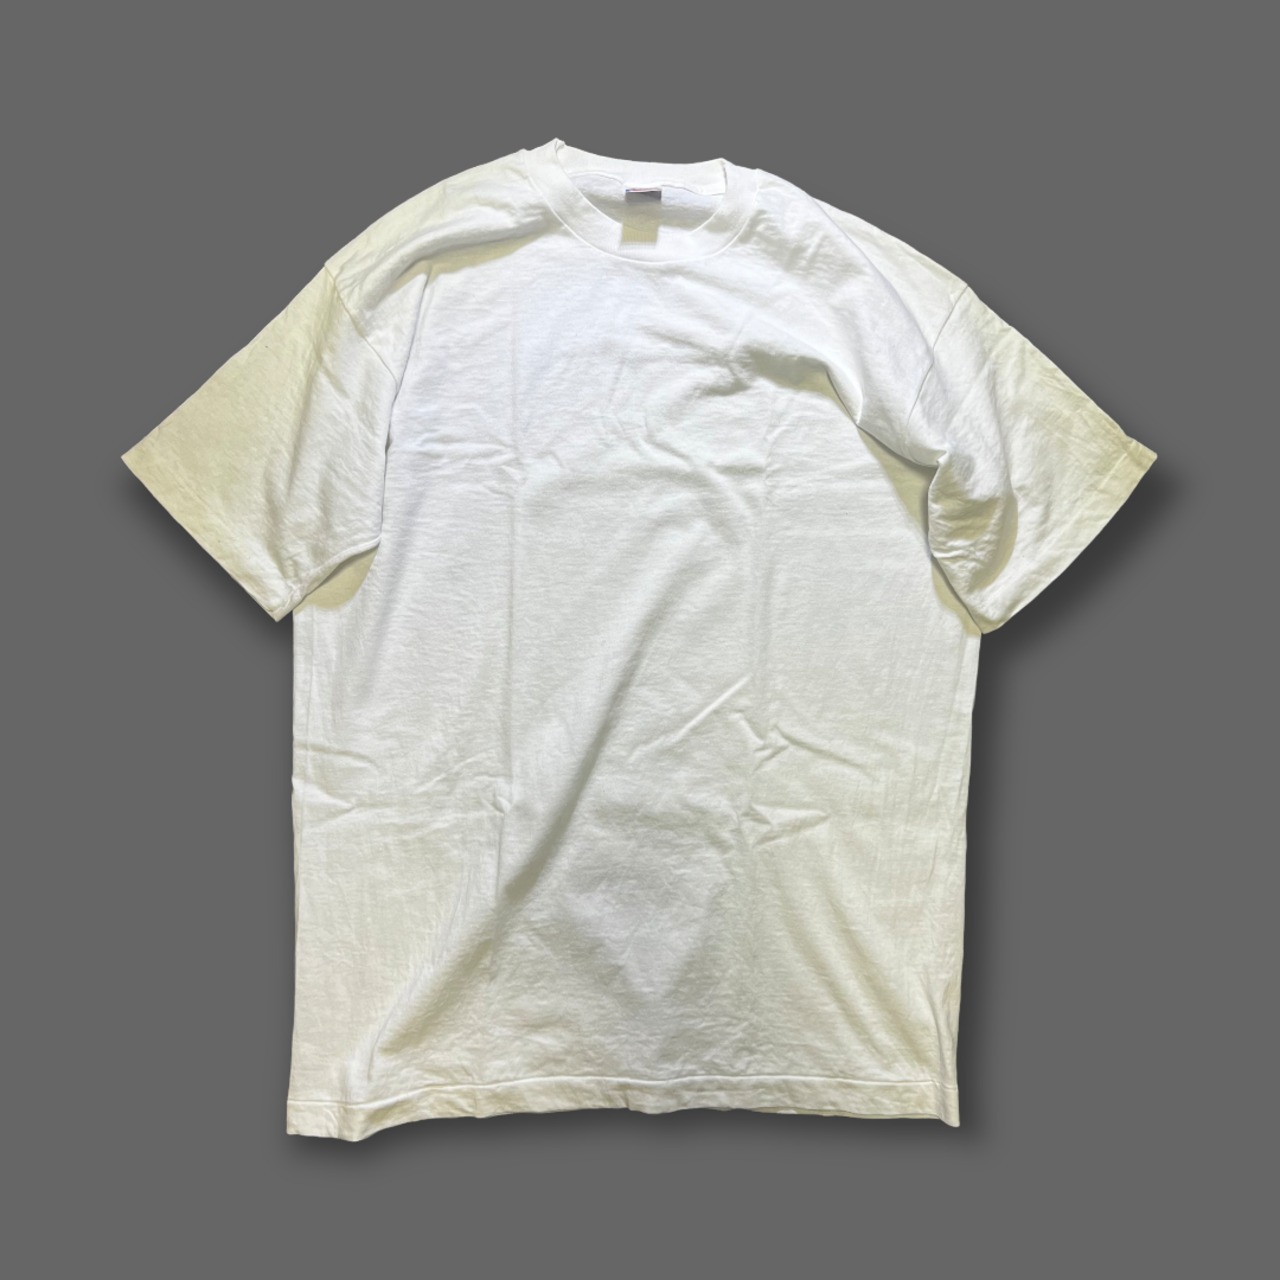 1990s FRUIT OF THE LOOM Blank T-Shirts